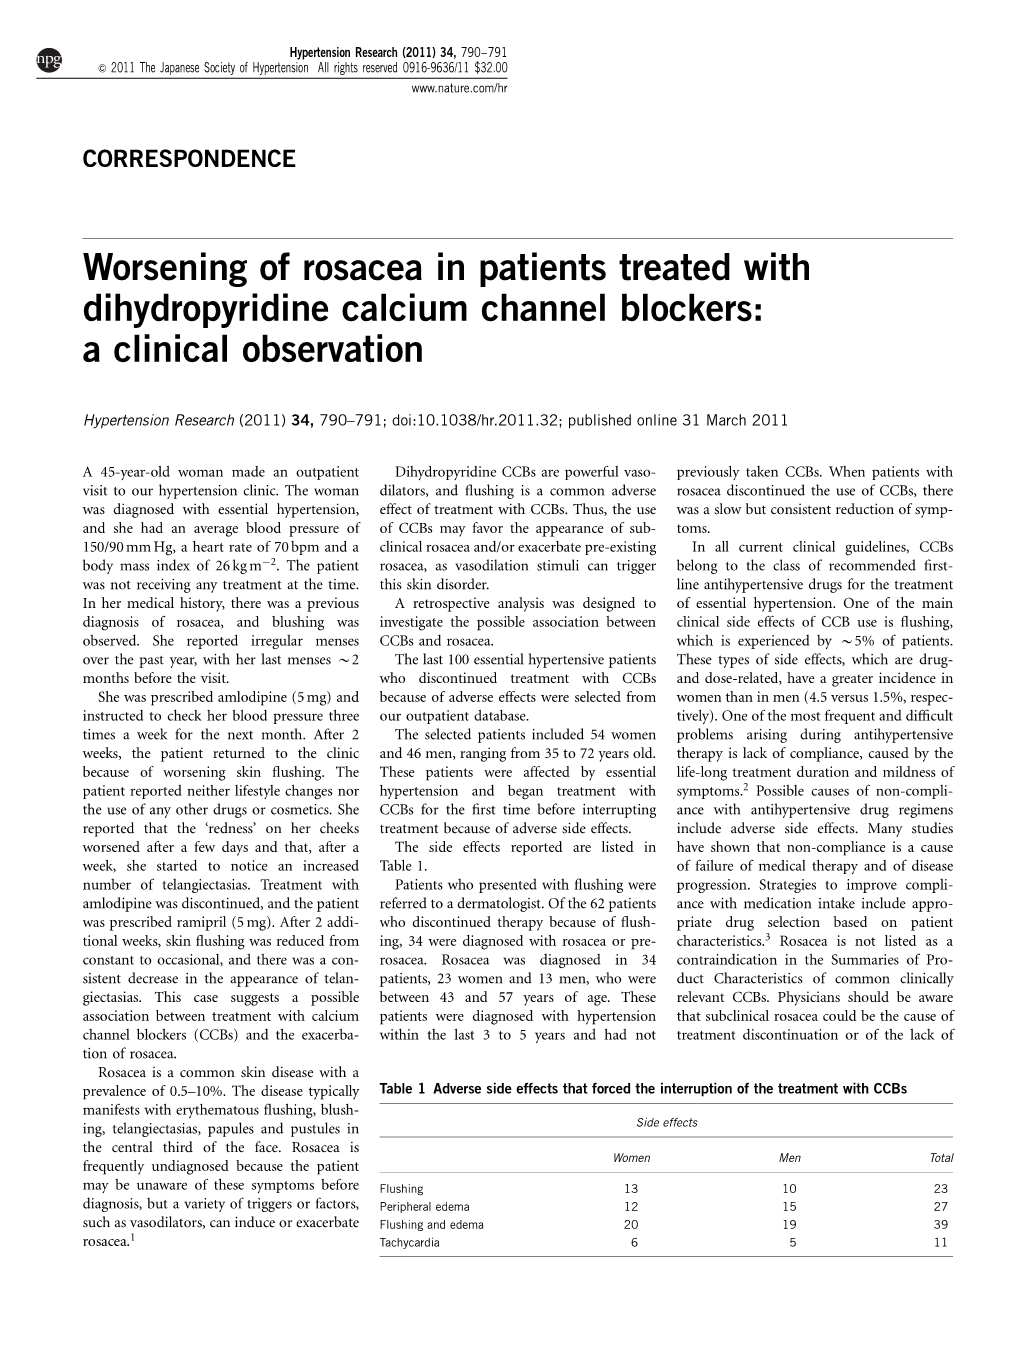 Worsening of Rosacea in Patients Treated with Dihydropyridine Calcium Channel Blockers: a Clinical Observation